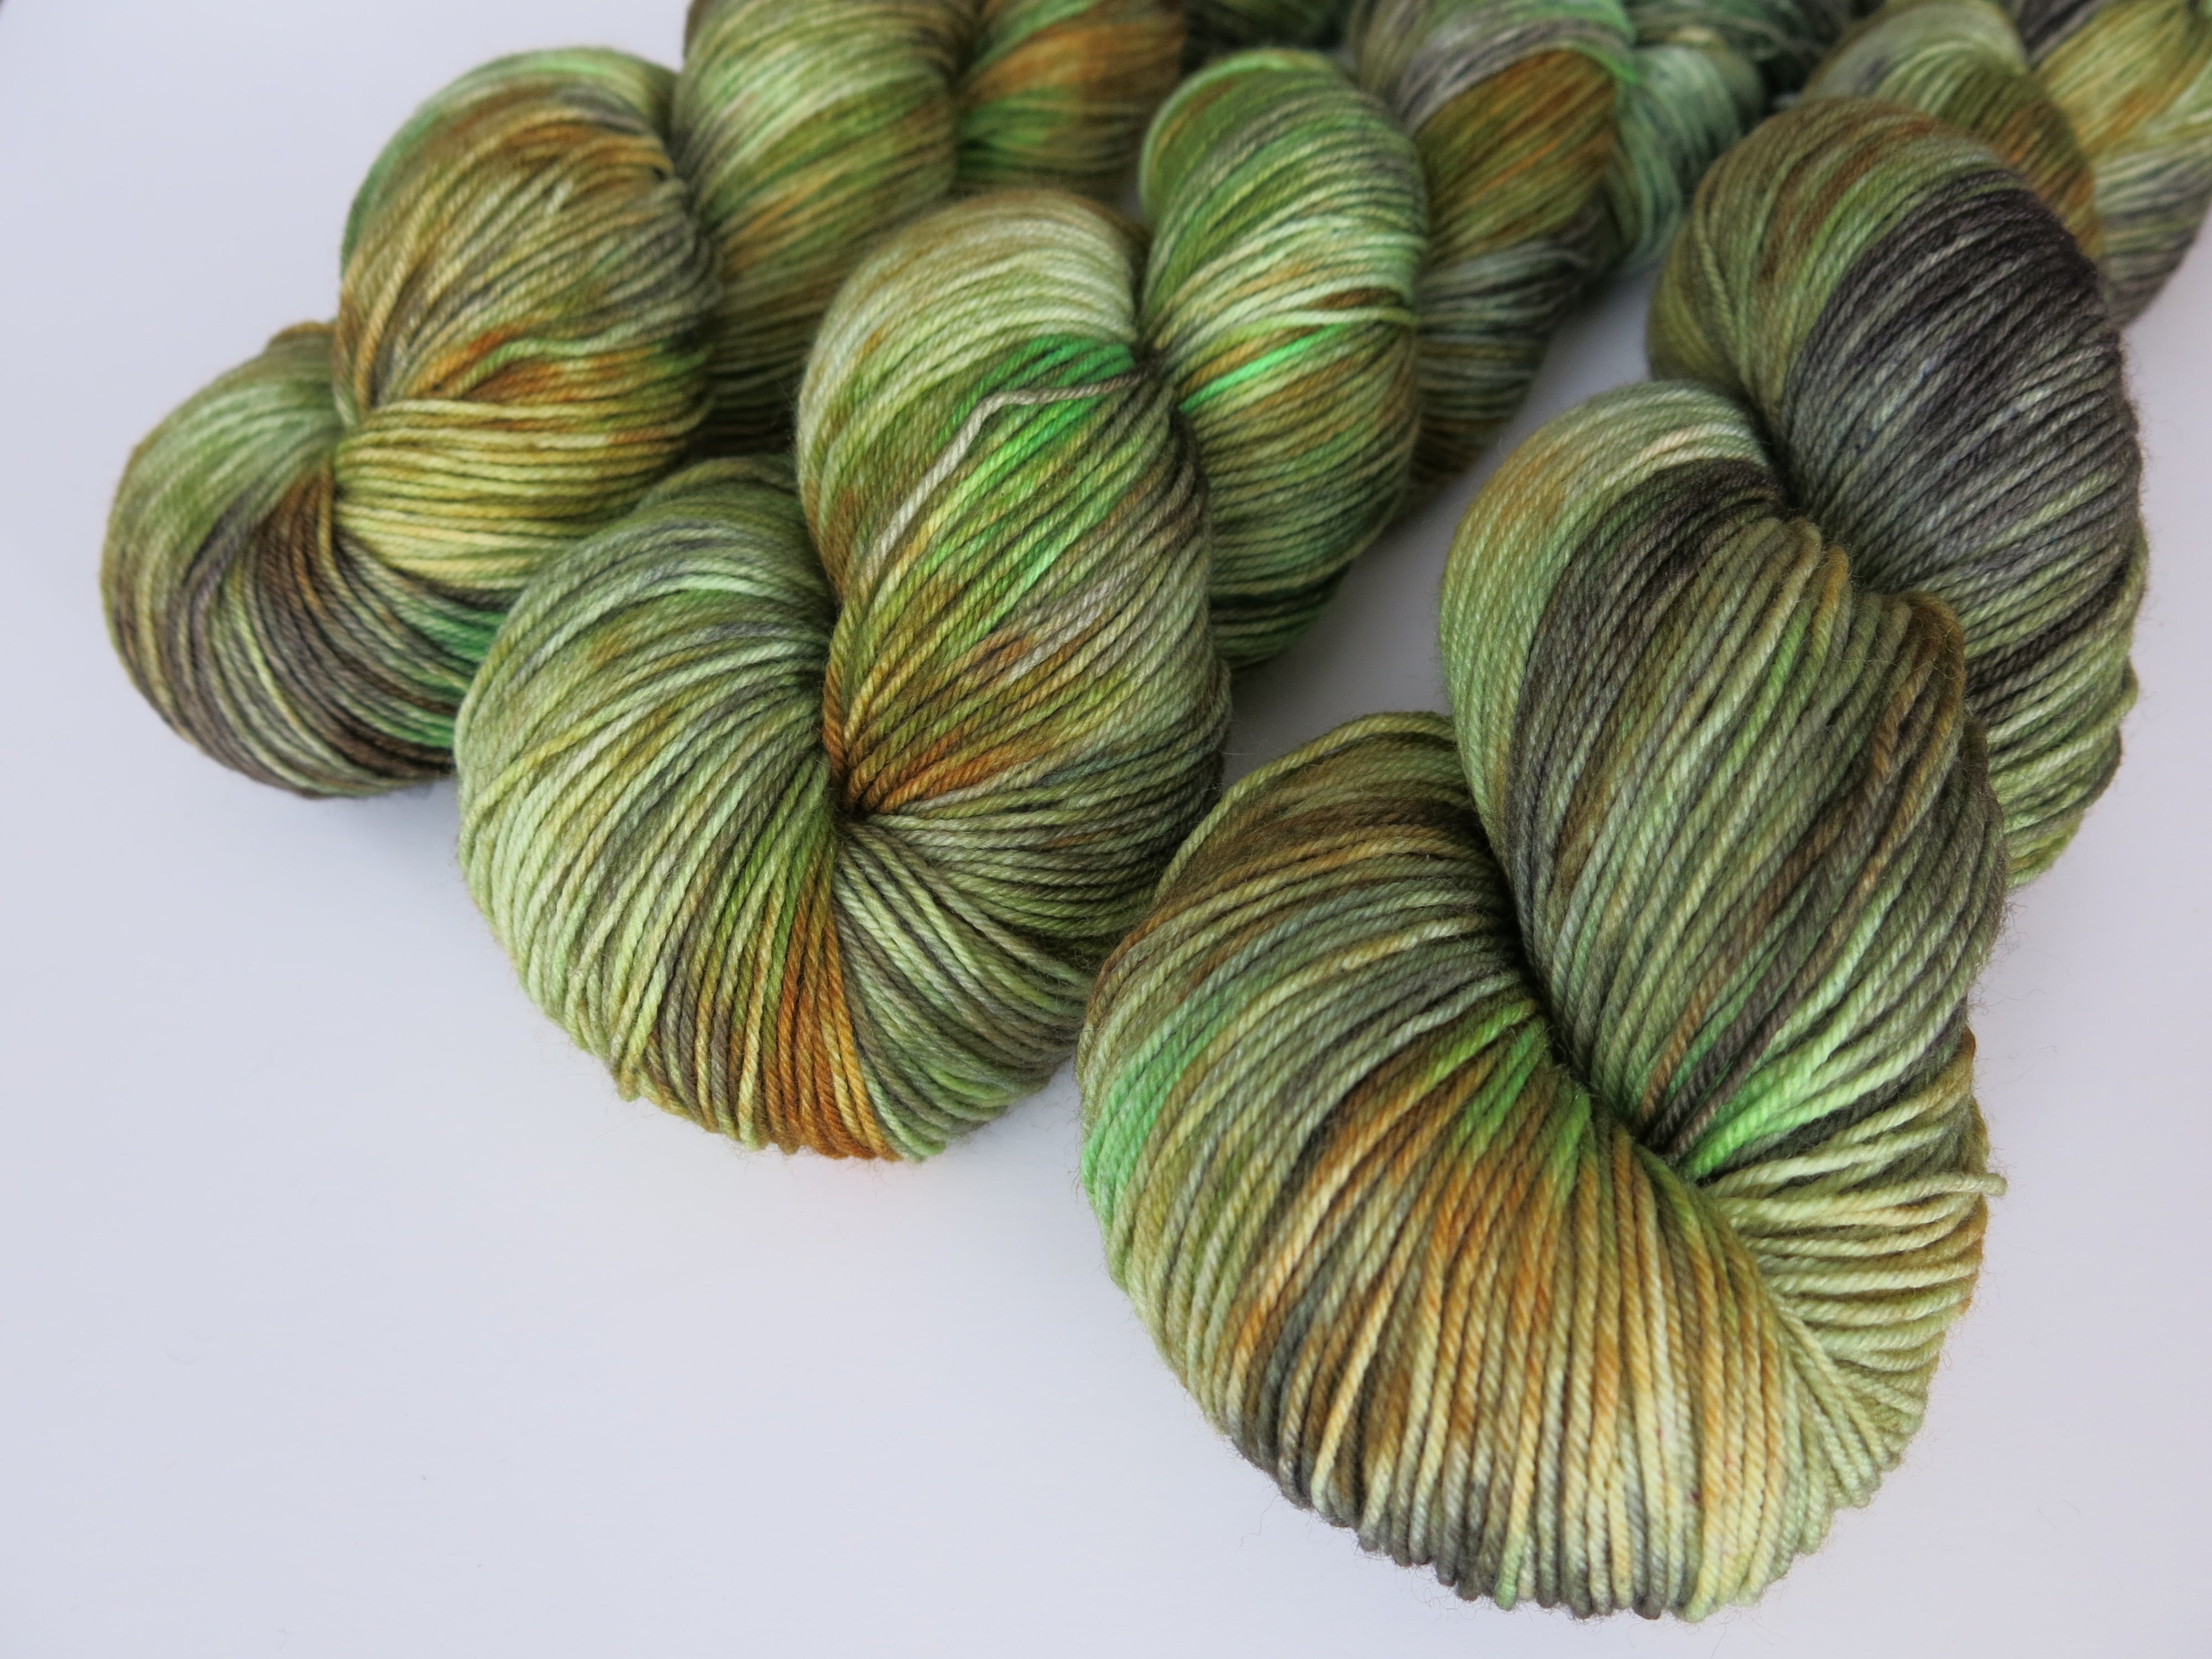 kettle dyed green and brown sock yarn skeins for knitting and crochet